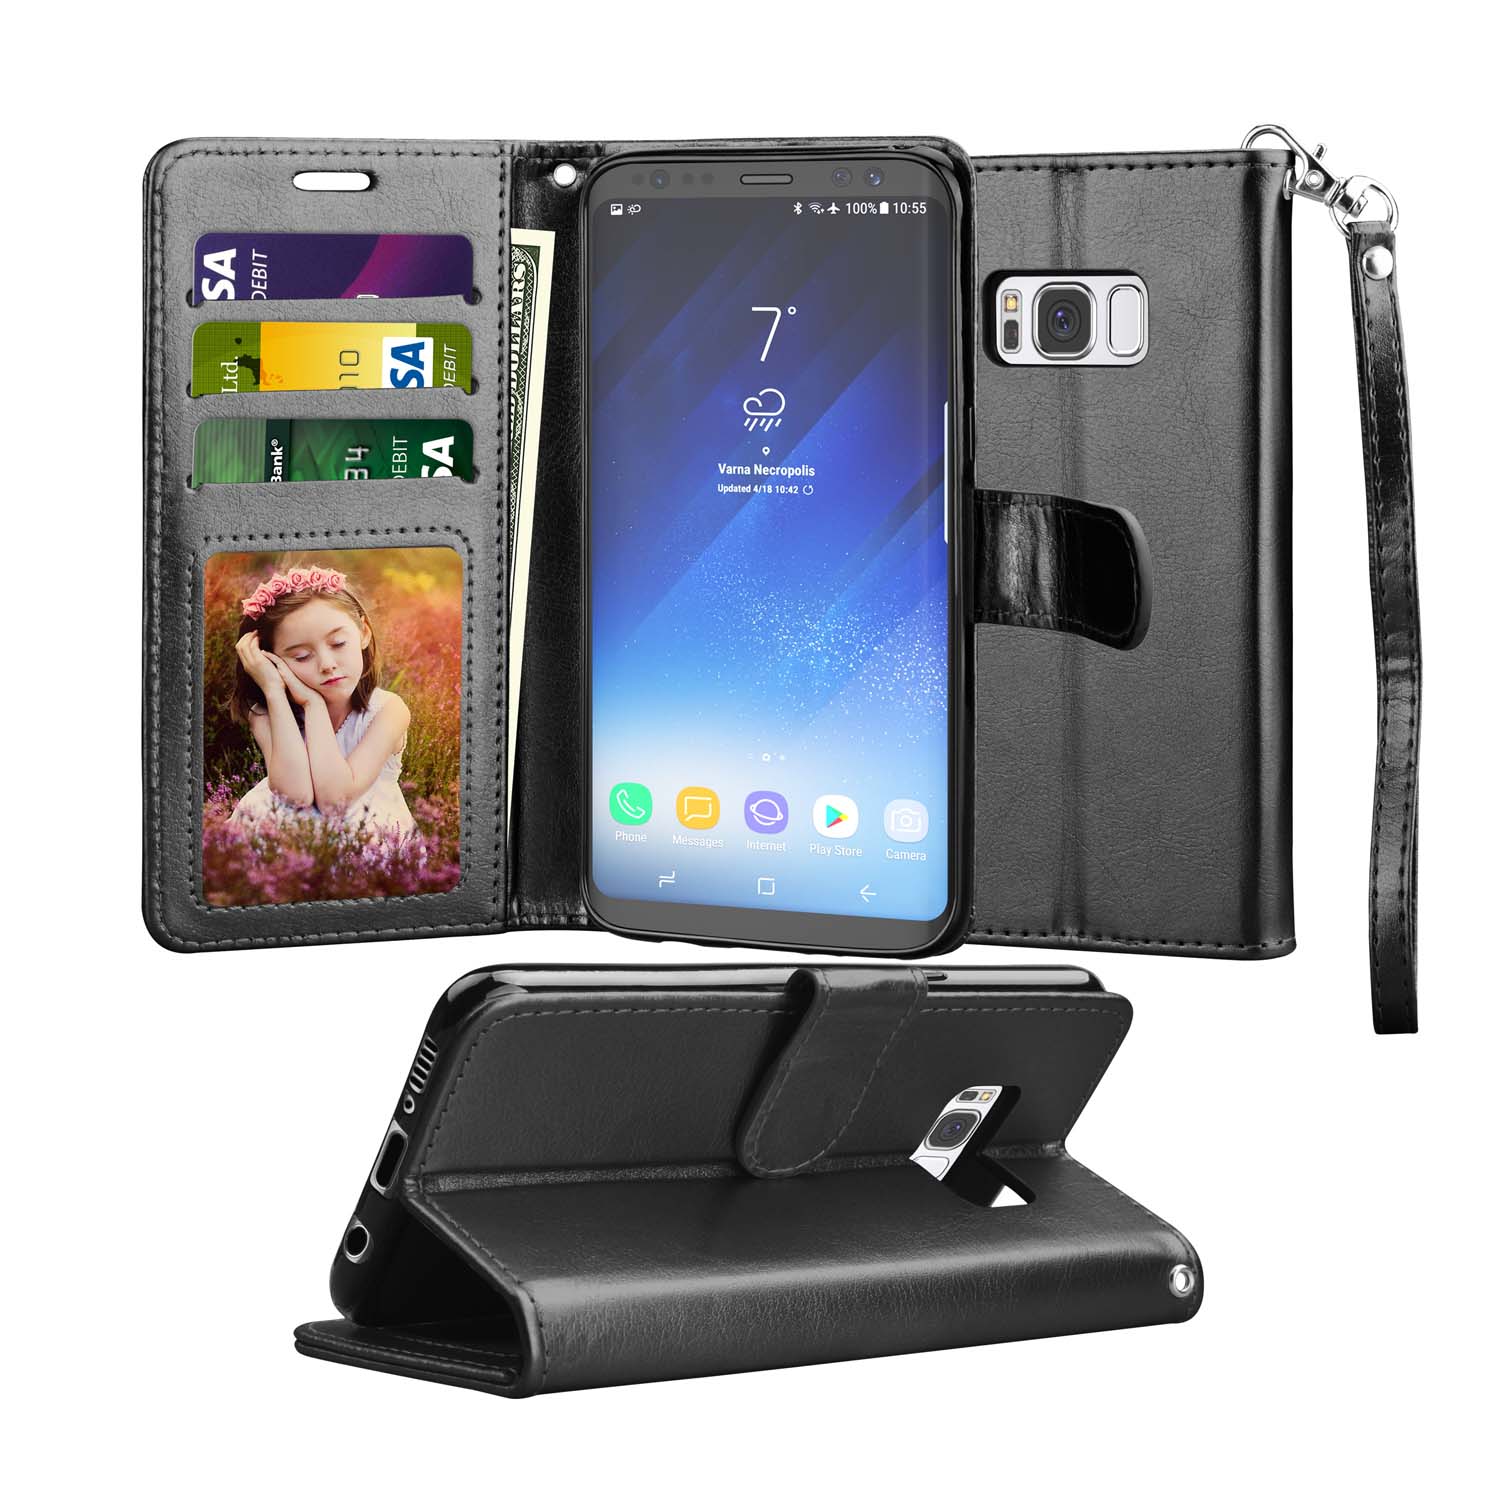 Tekcoo Galaxy S8 / S8 Plus Wallet Case, for Galaxy S8 / S8+ PU Leather Case, Tekcoo [Black] PU Leather [3 Card Slots] ID Credit Flip Cover [Kickstand] Cover & Wrist Strap - image 1 of 5